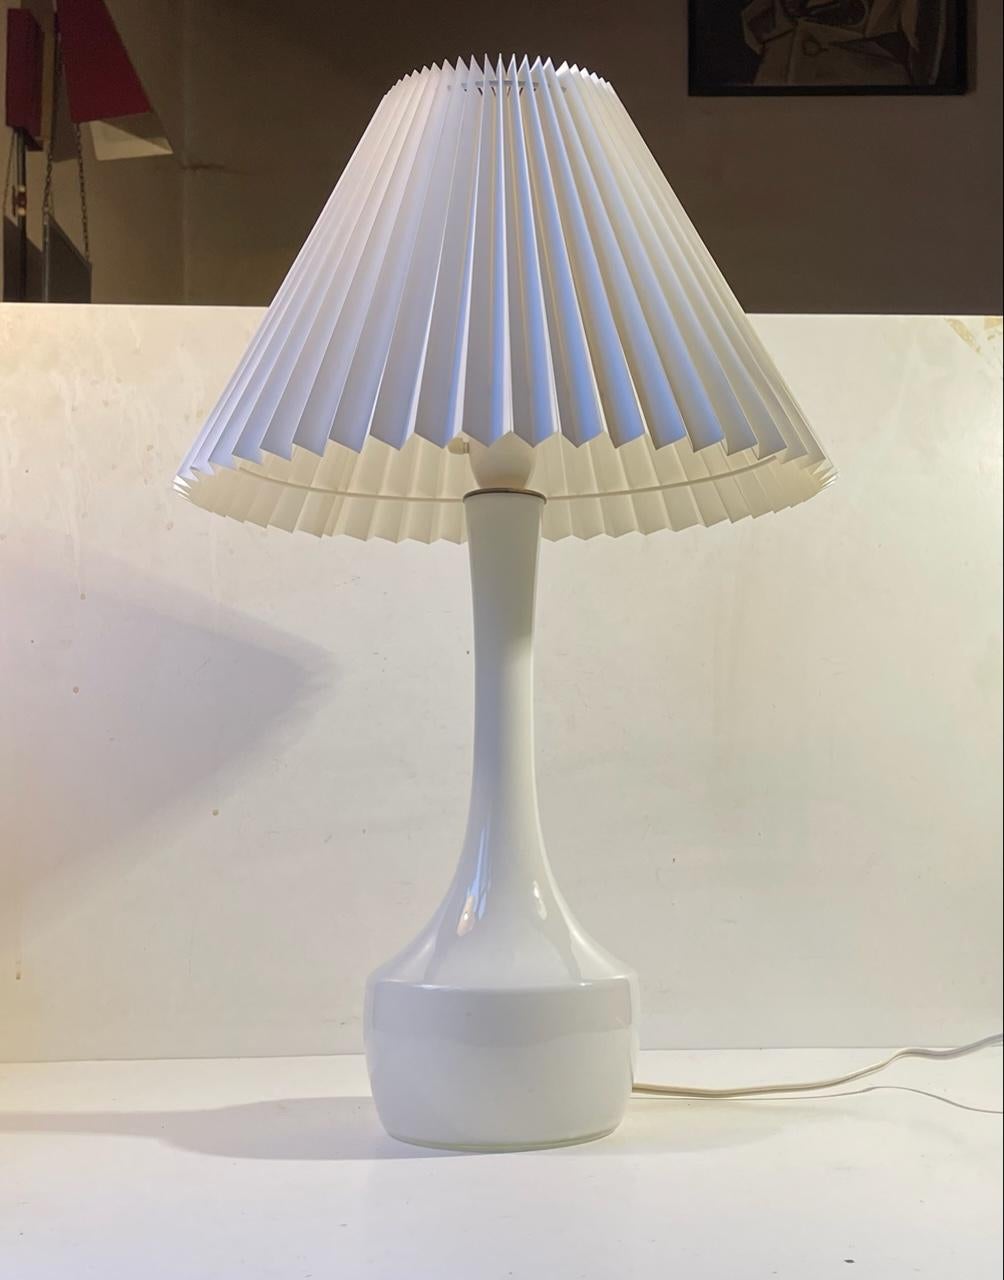 A rare organically shaped long neck table light in cased white opaline glass. Designed by the kid-brother of Arne Bang alias Jacob Eiler Bang in the mid to late 1950s. Manufactured by Holmegaard/Kastrup in Denmark. Fluted white new Danish shade is